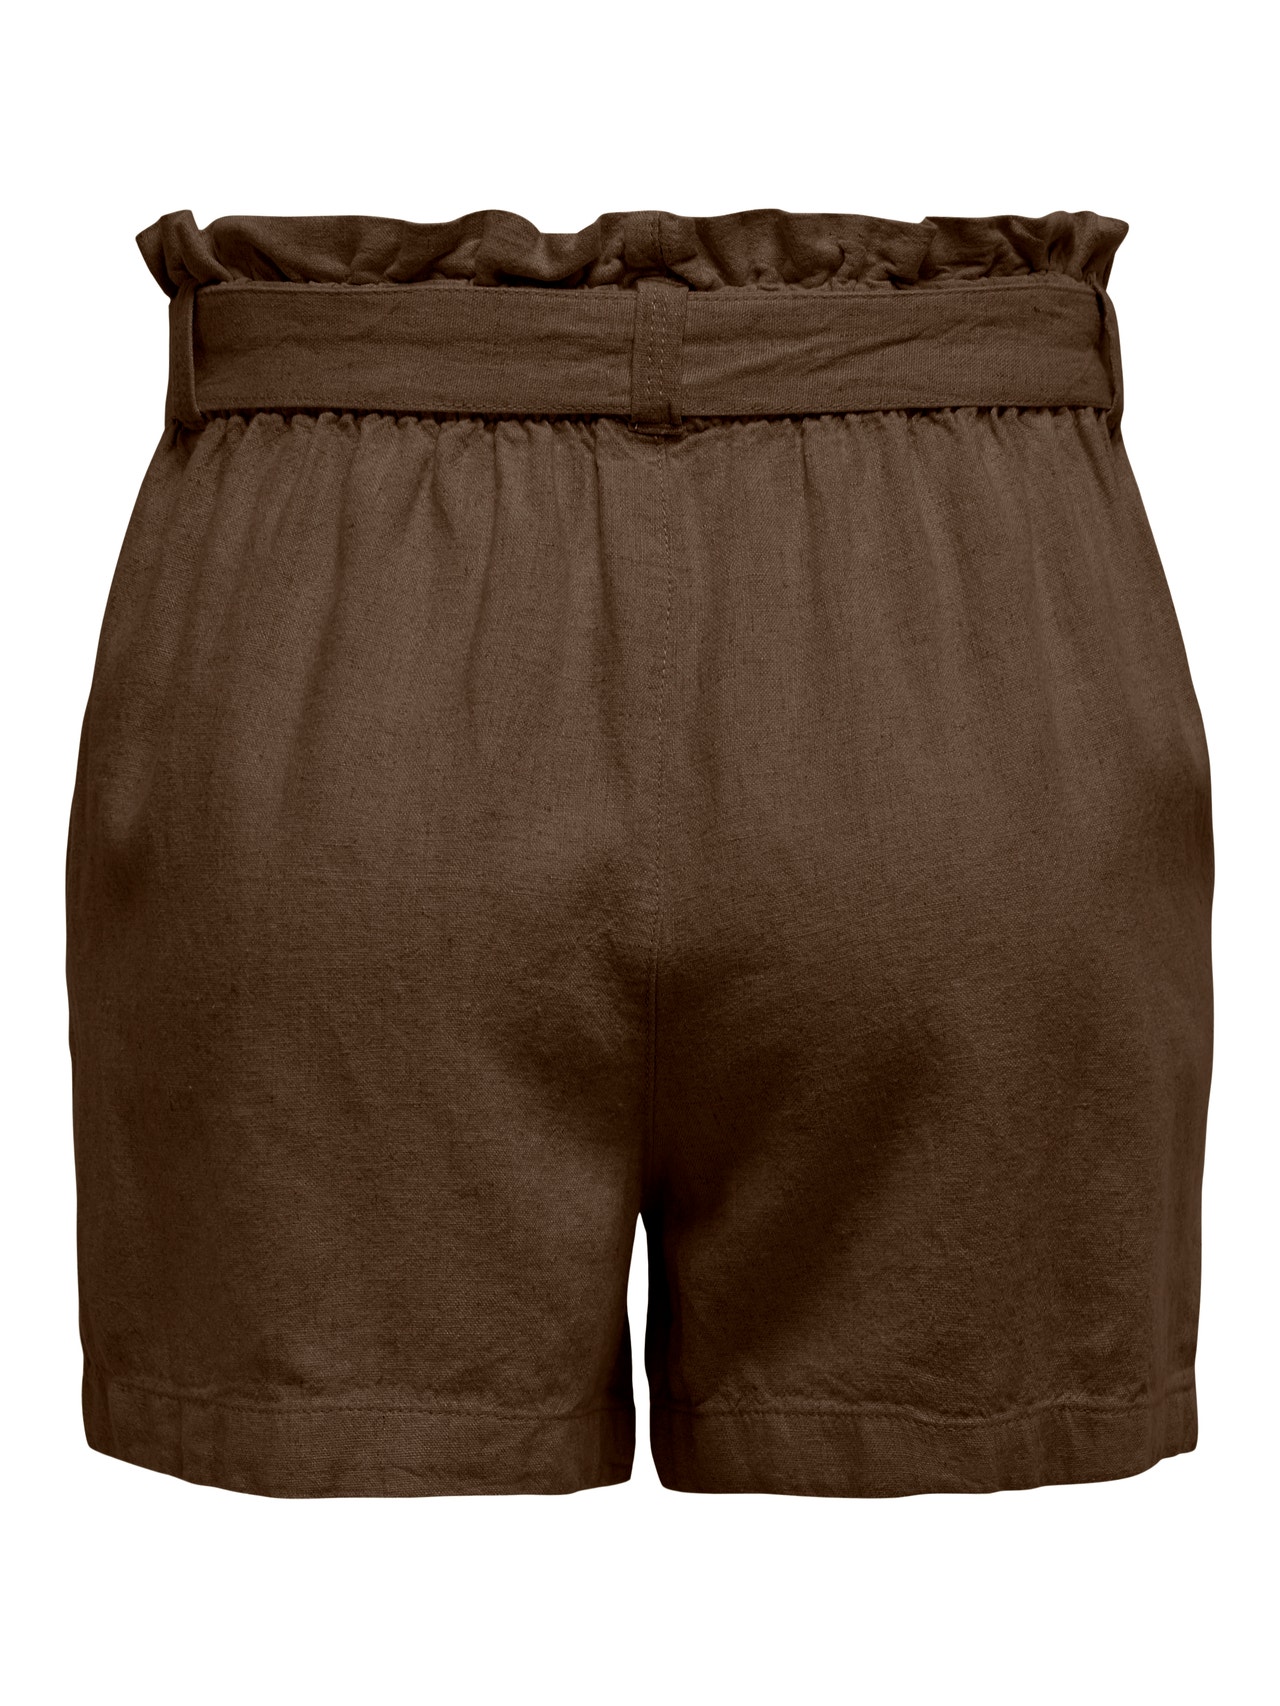 ONLY Normal geschnitten Mittlere Taille Shorts -Carafe - 15225921